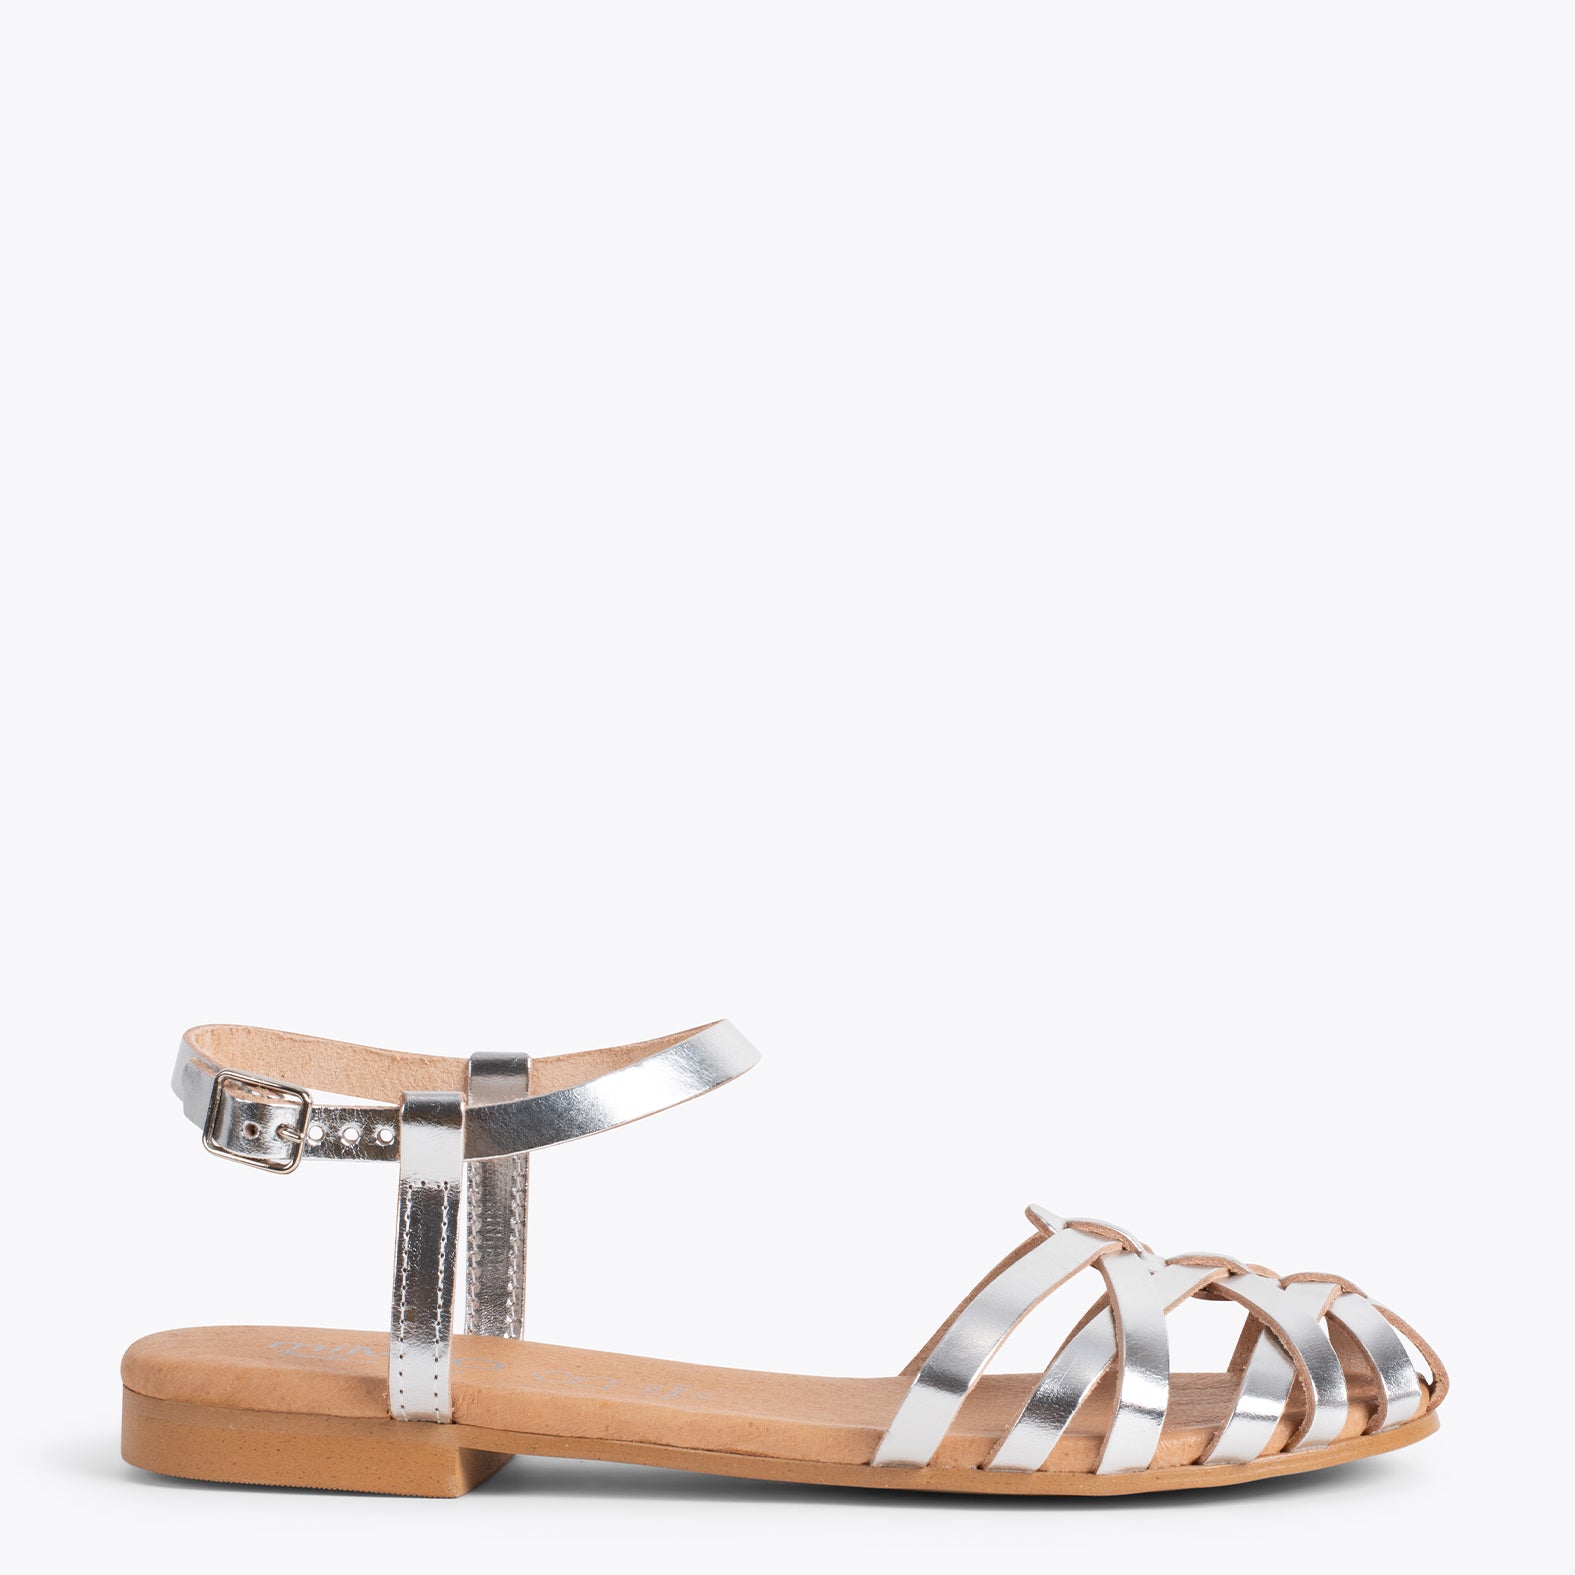 BEACH - SILVER sandal with straps